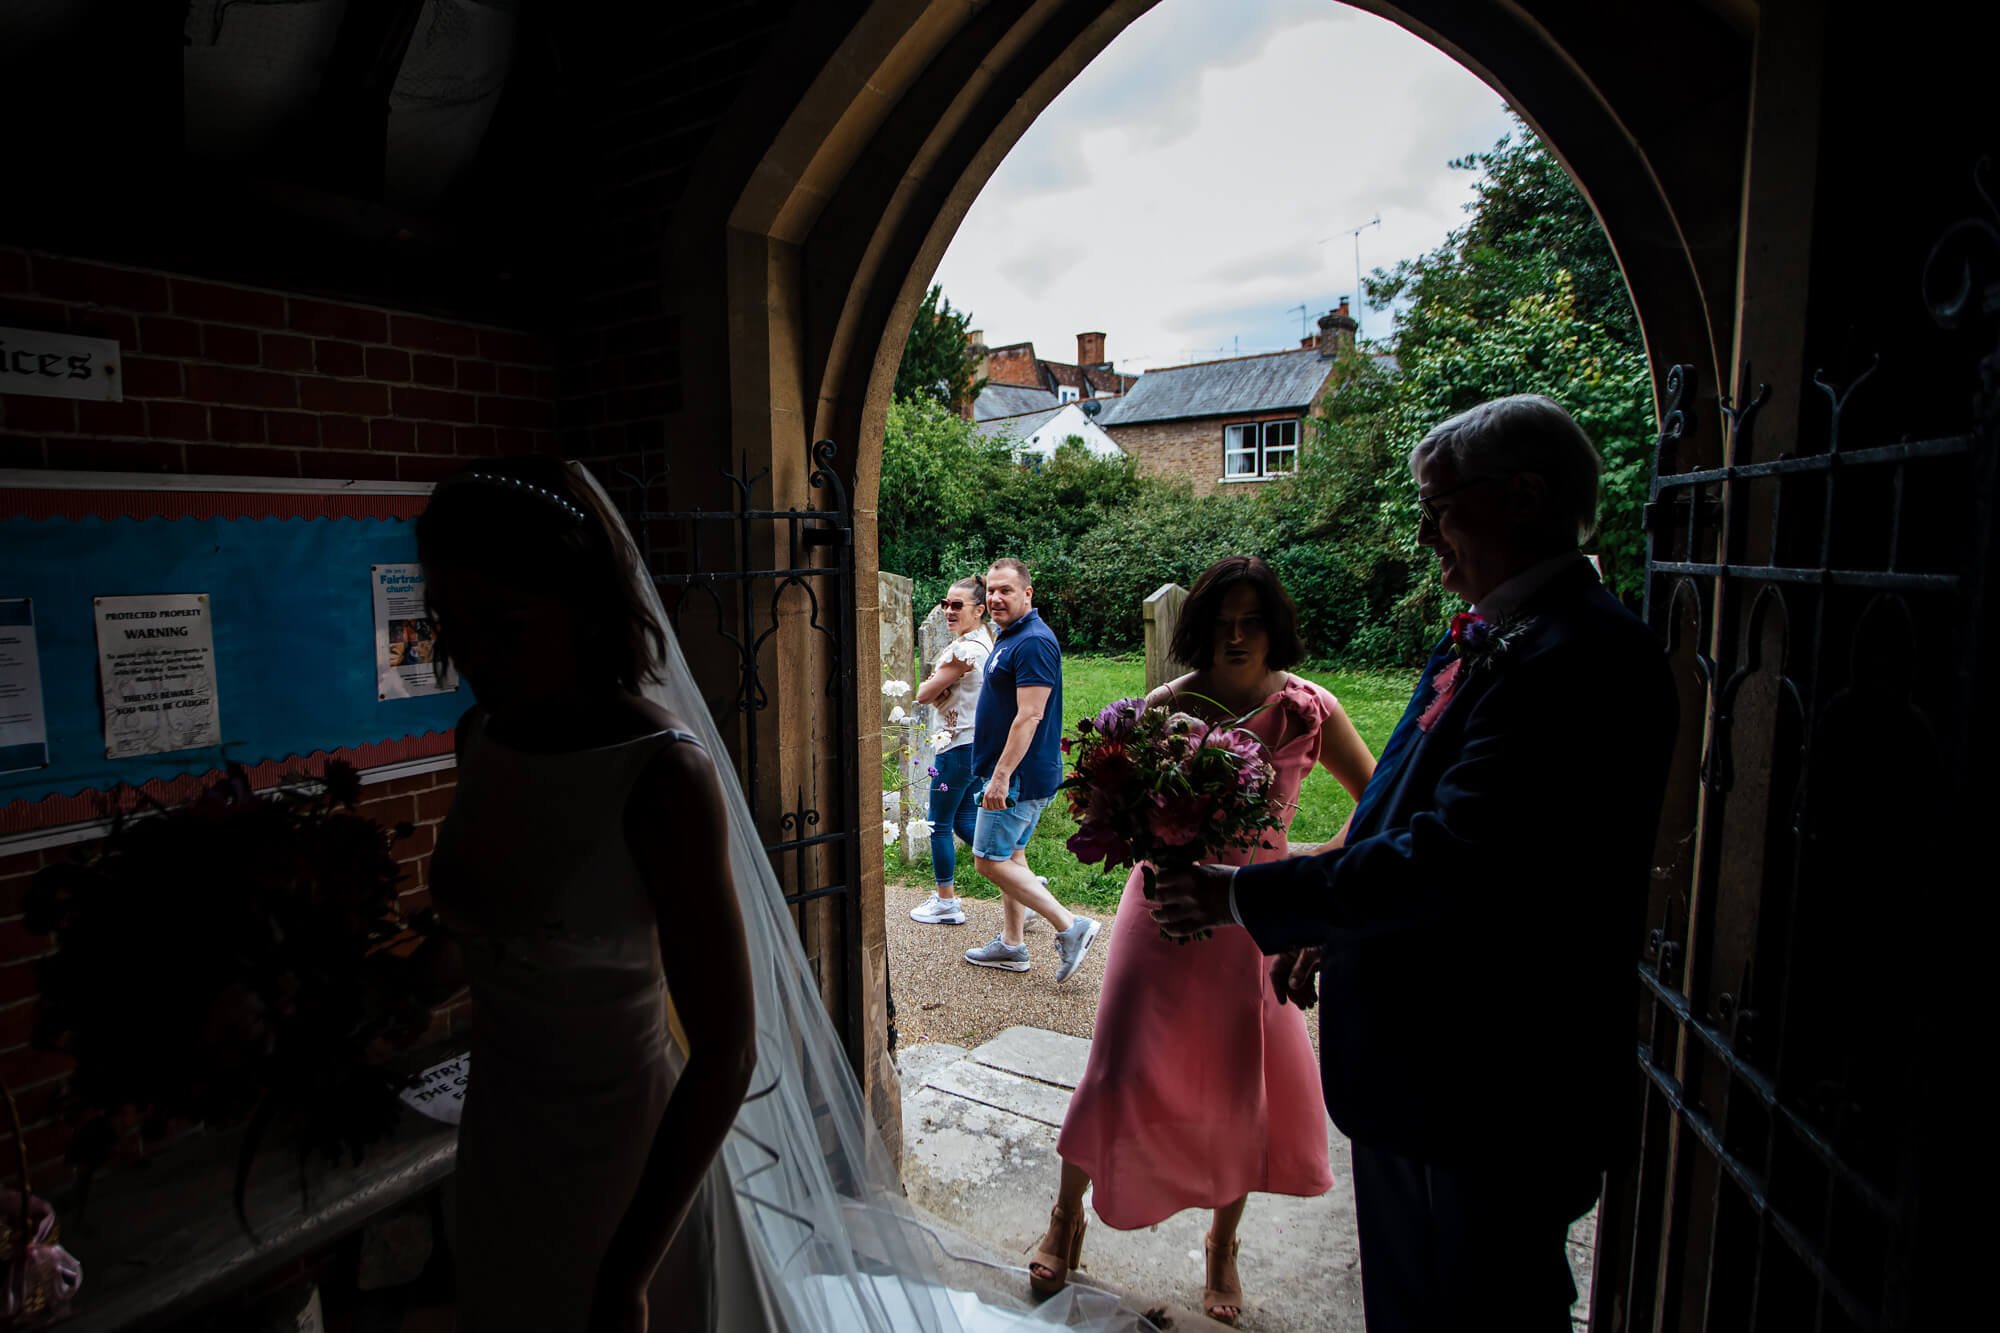 Passers by looking at the bride at the church